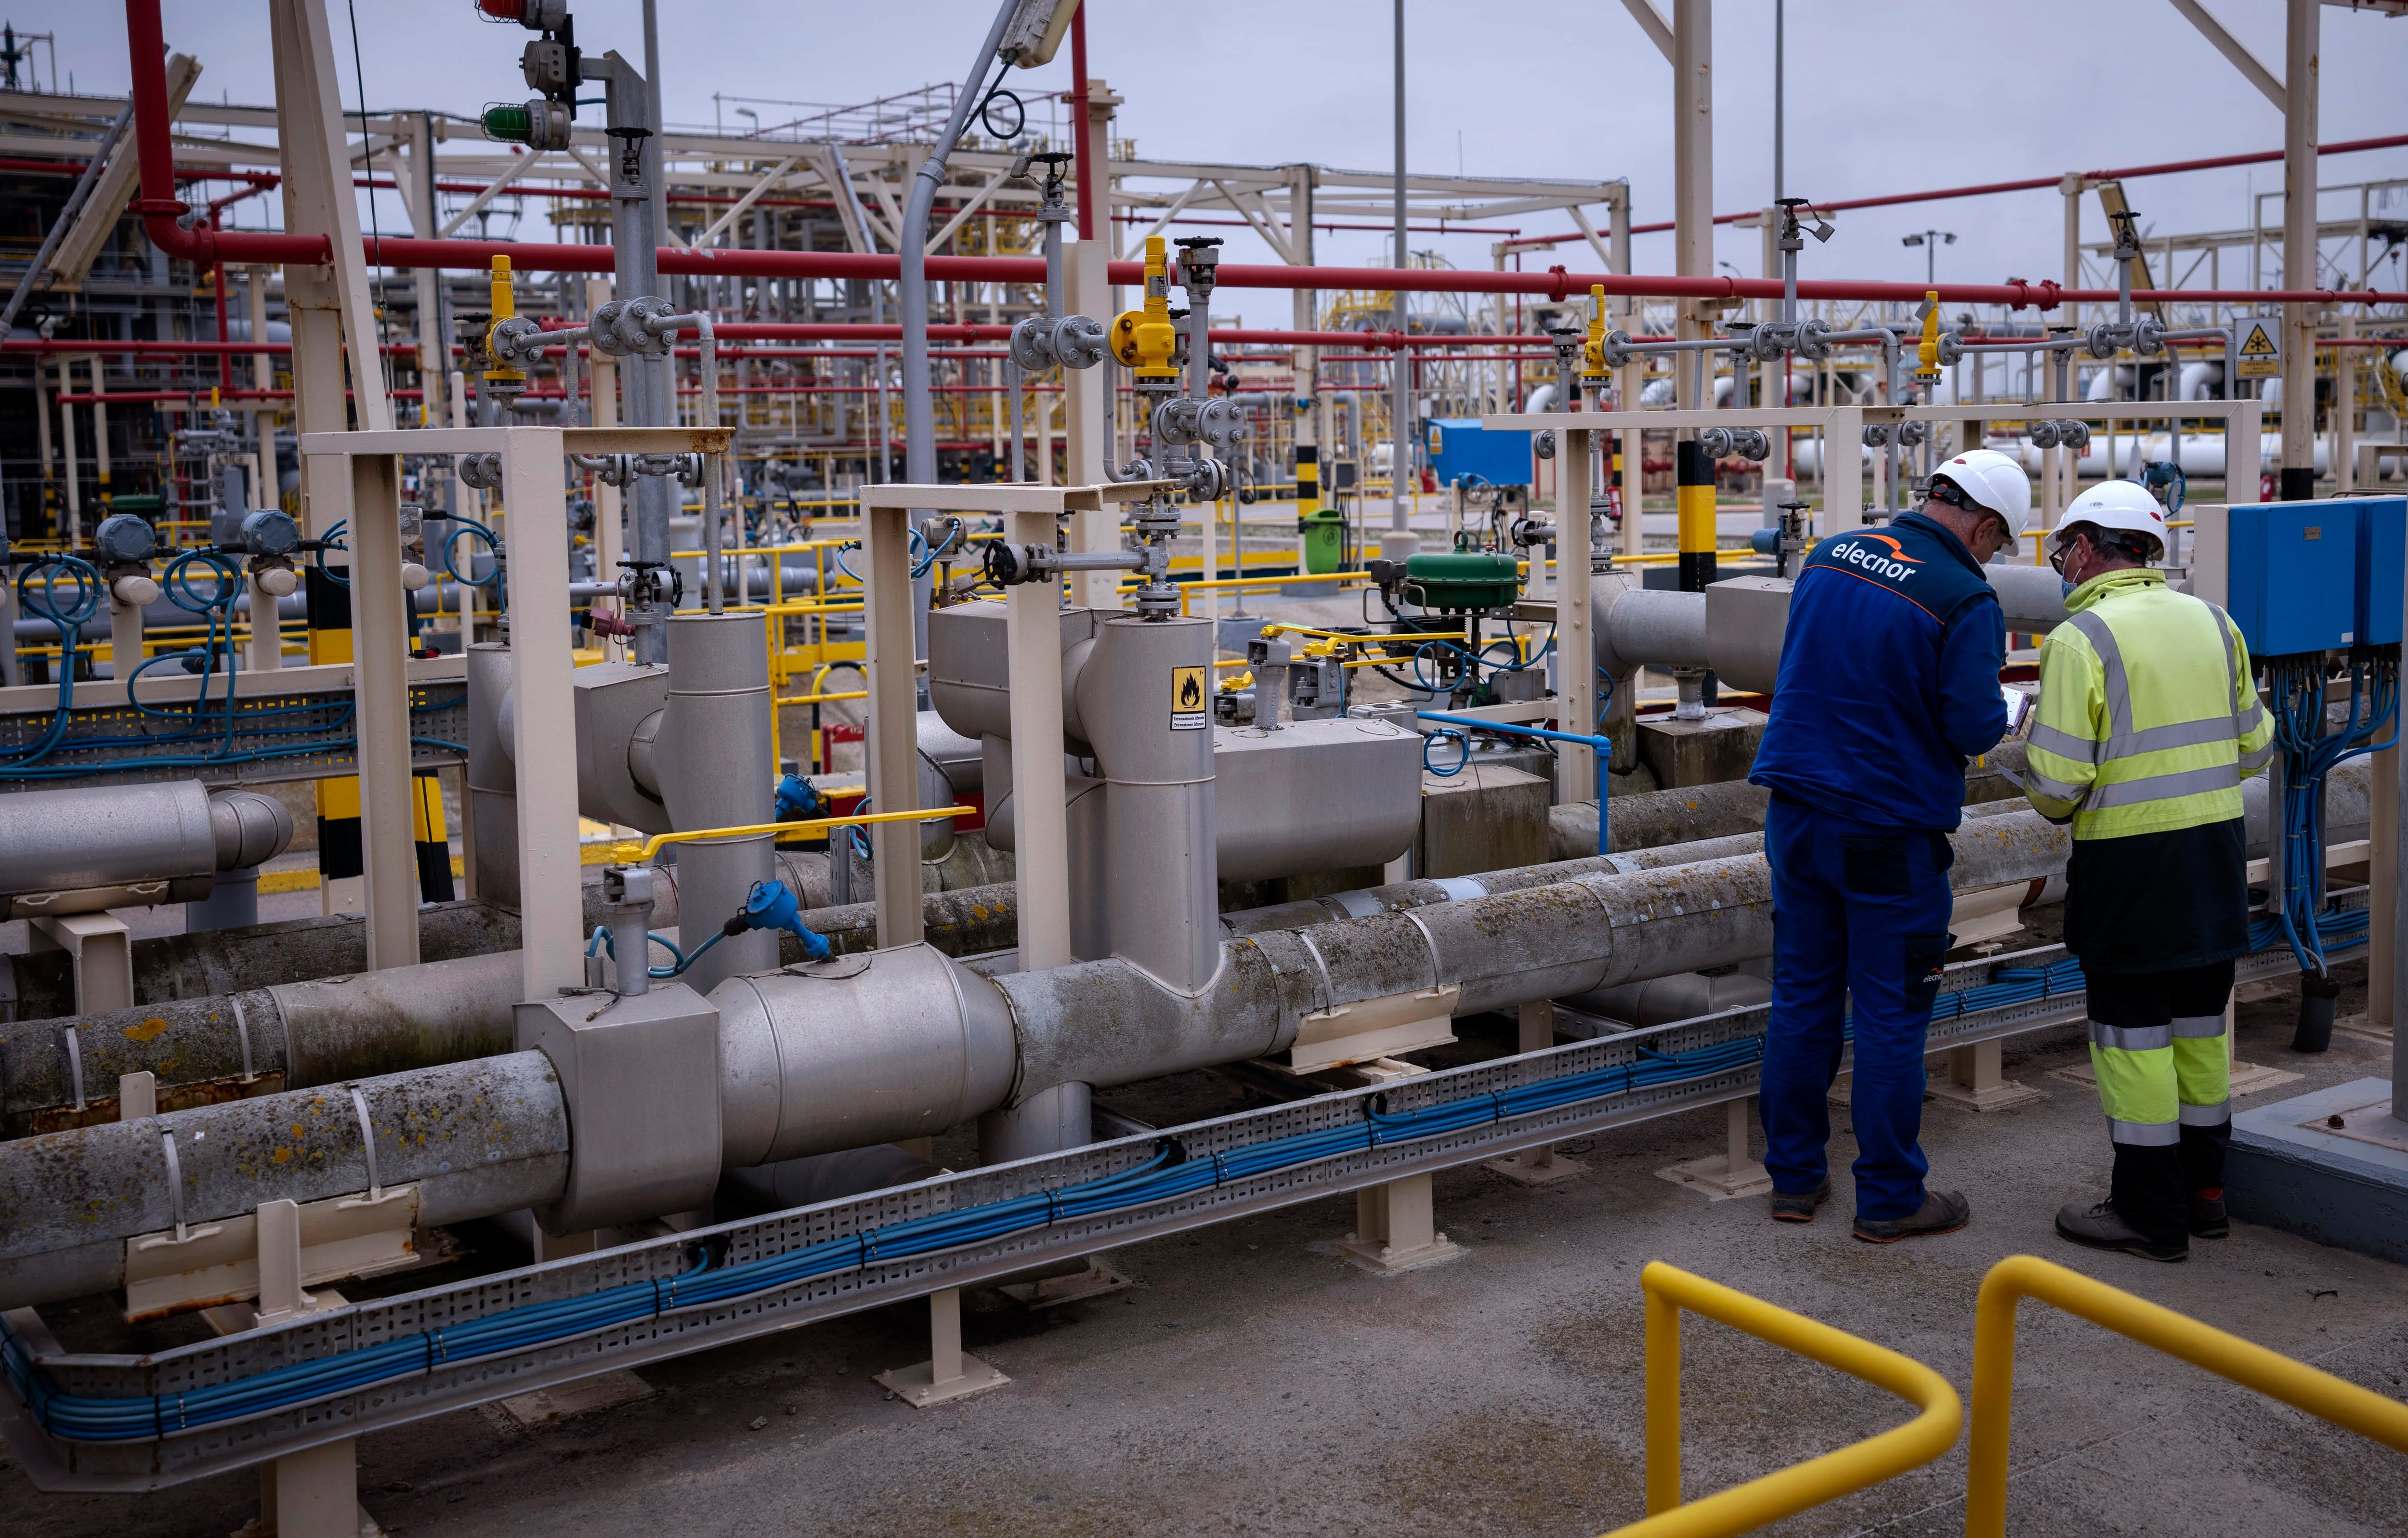 Operators work at Enagas regasification plant, the largest LNG plant in Europe, in Barcelona, Spain, on March 29, 2022.